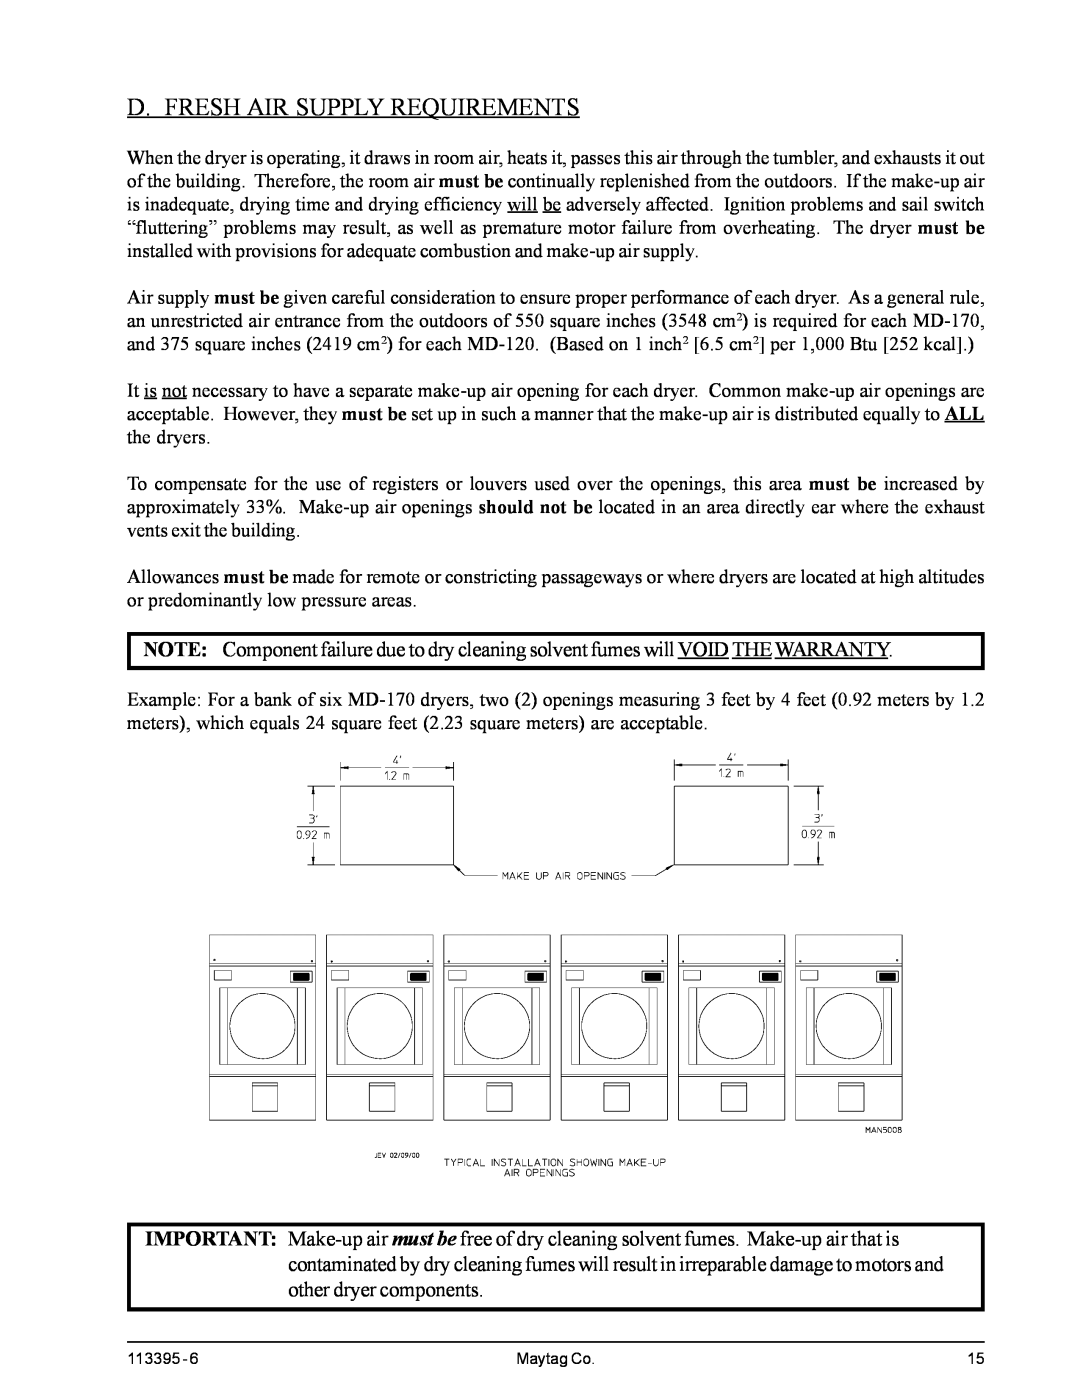 American Dryer Corp MDG-120PVV, MD-170PTVW installation manual D. Fresh Air Supply Requirements 